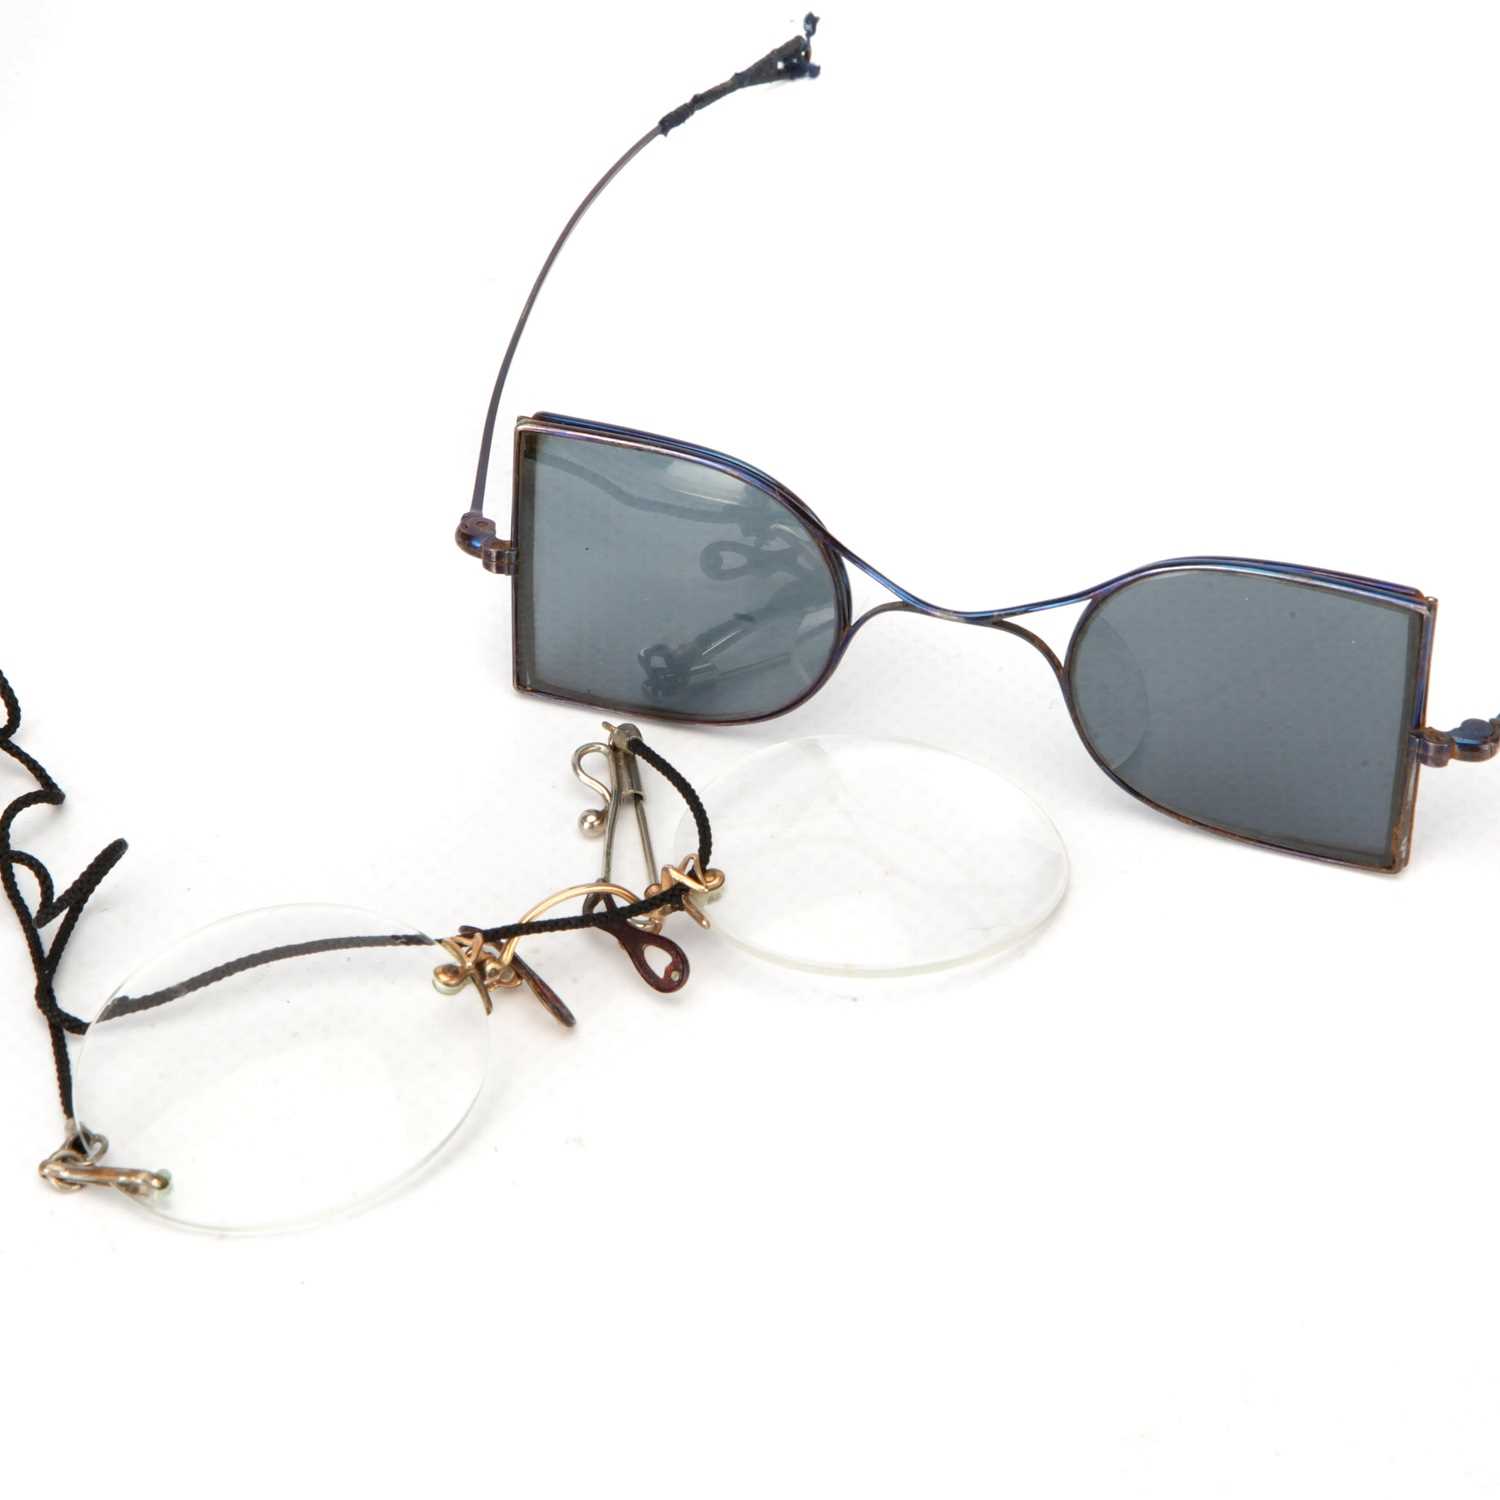 Lot 42 - A Pair of Early 19th Century Double-Sided Railway Sunglasses & Pince-nez